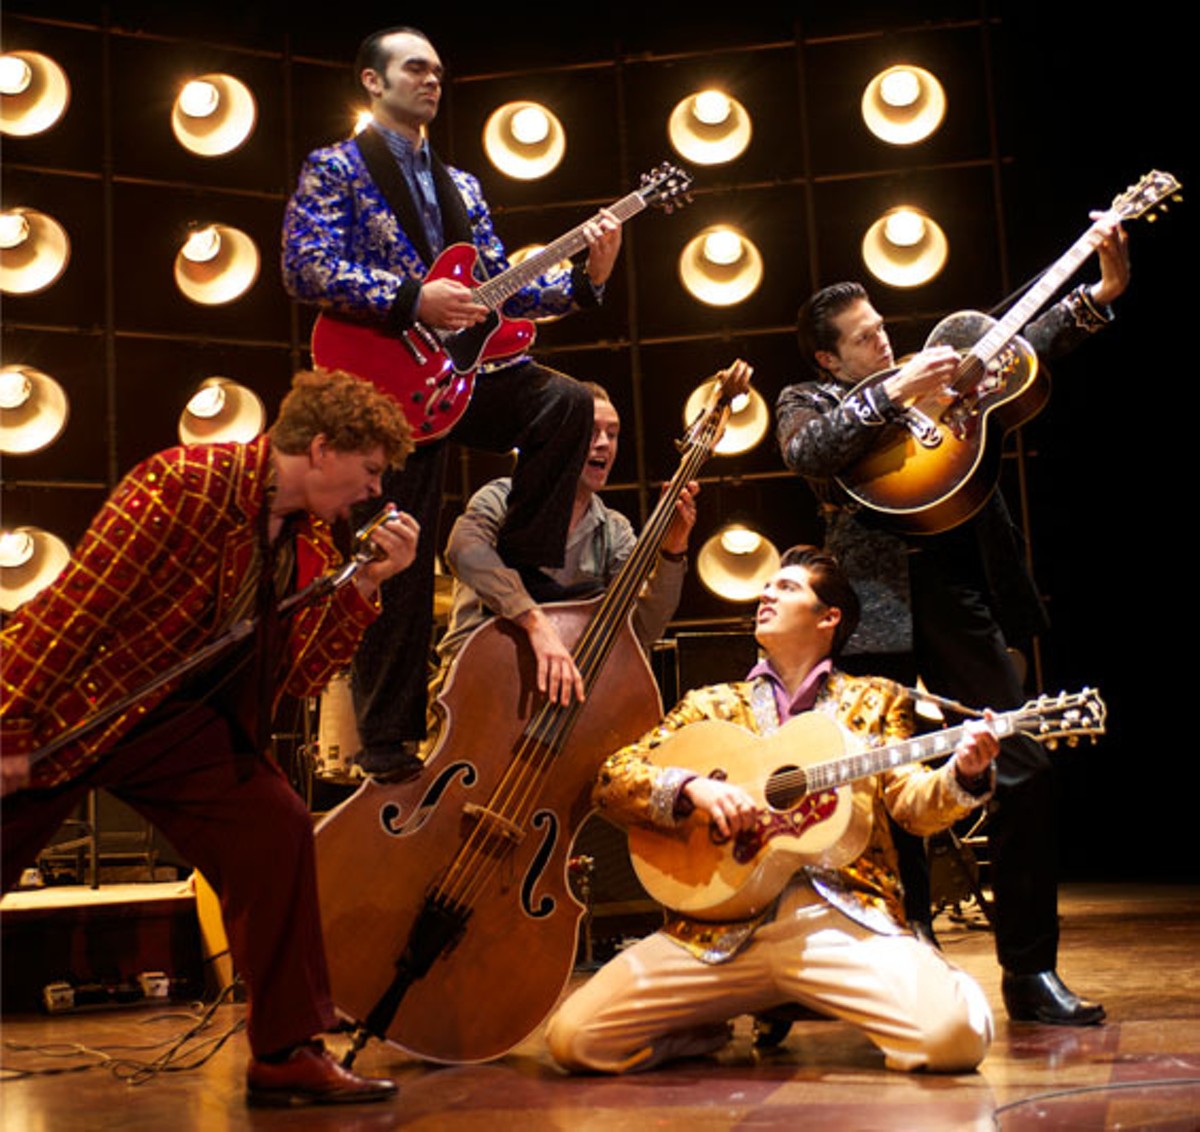 Million Dollar Quartet is a fine romp through a magical night &mdash; when the music's playing, that is.